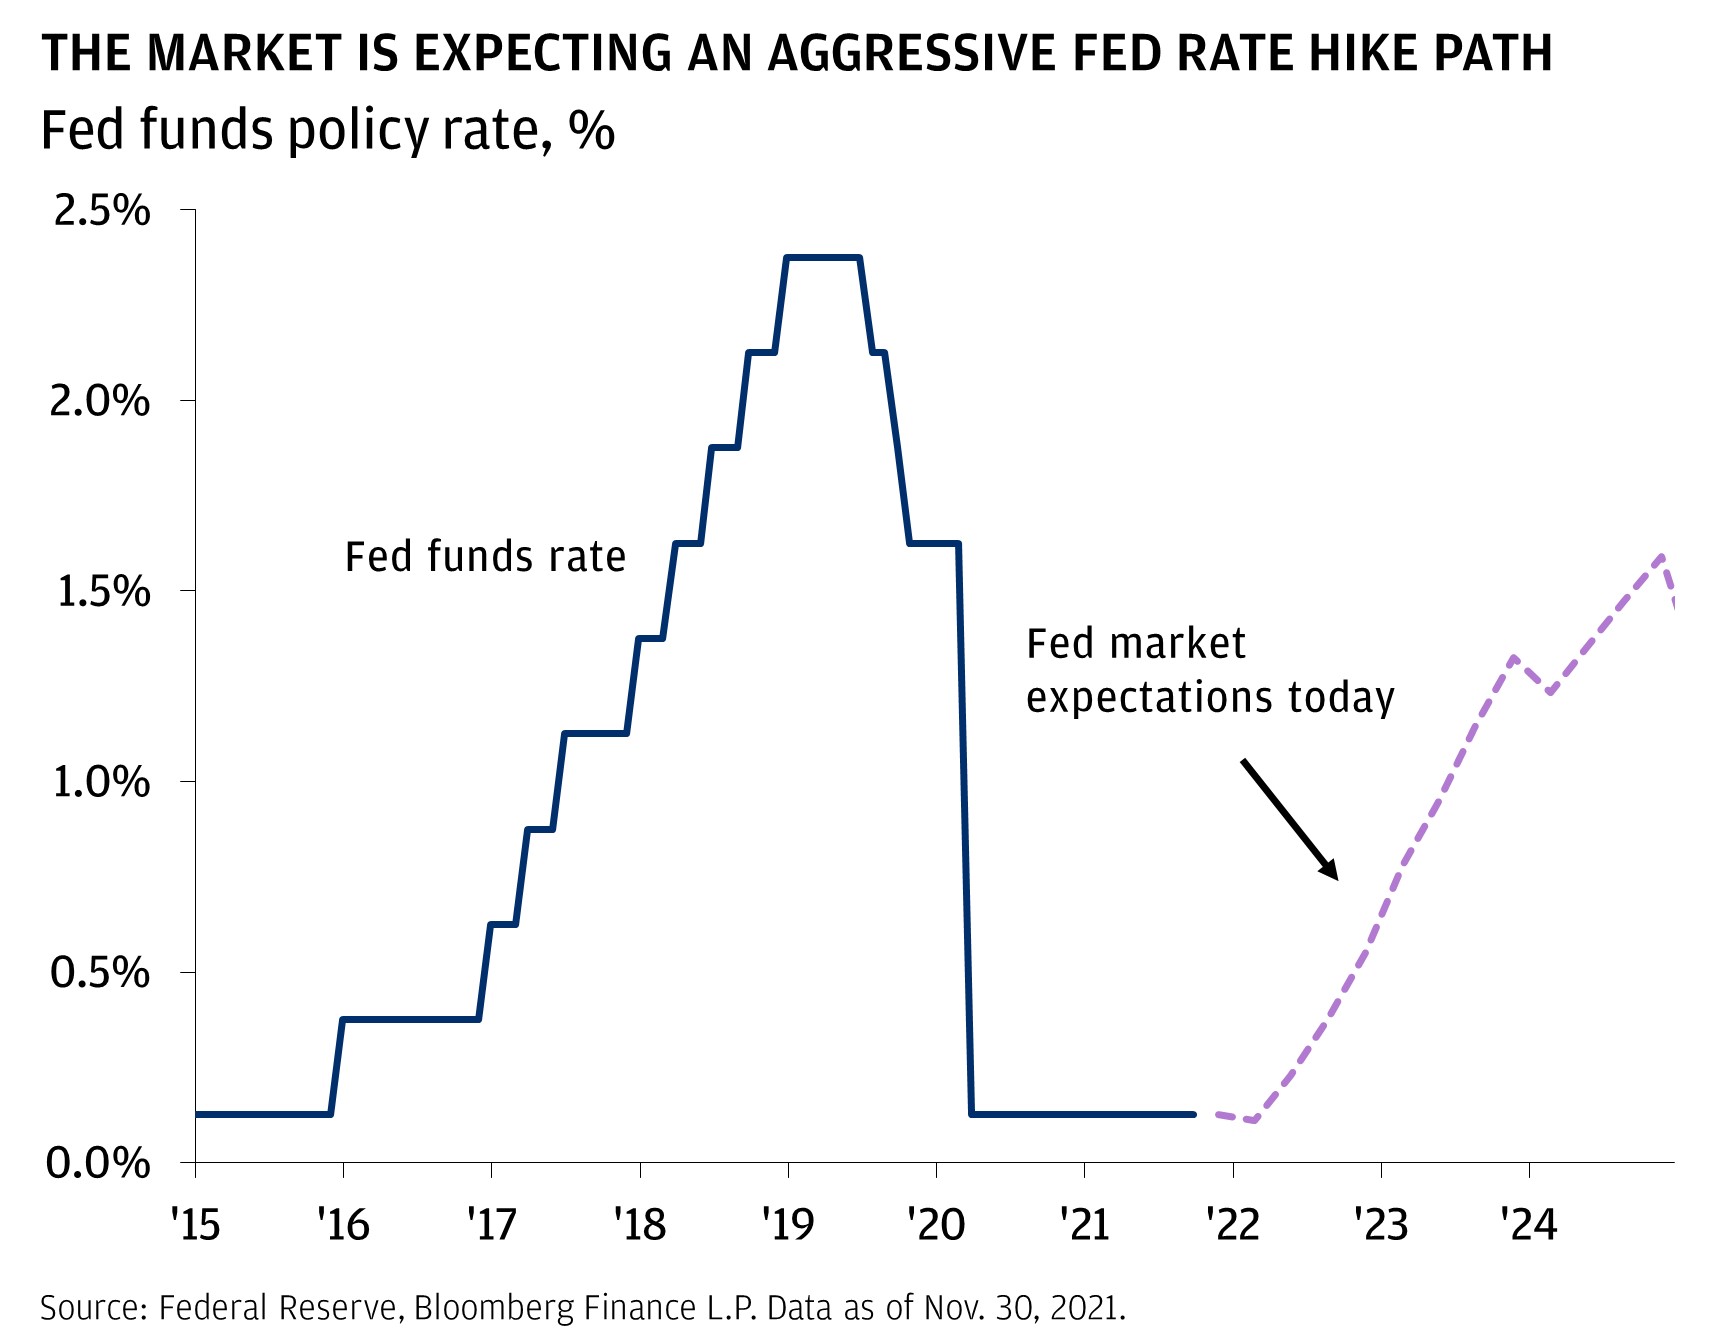 The Market is expecting an aggressive fixed rate hike path